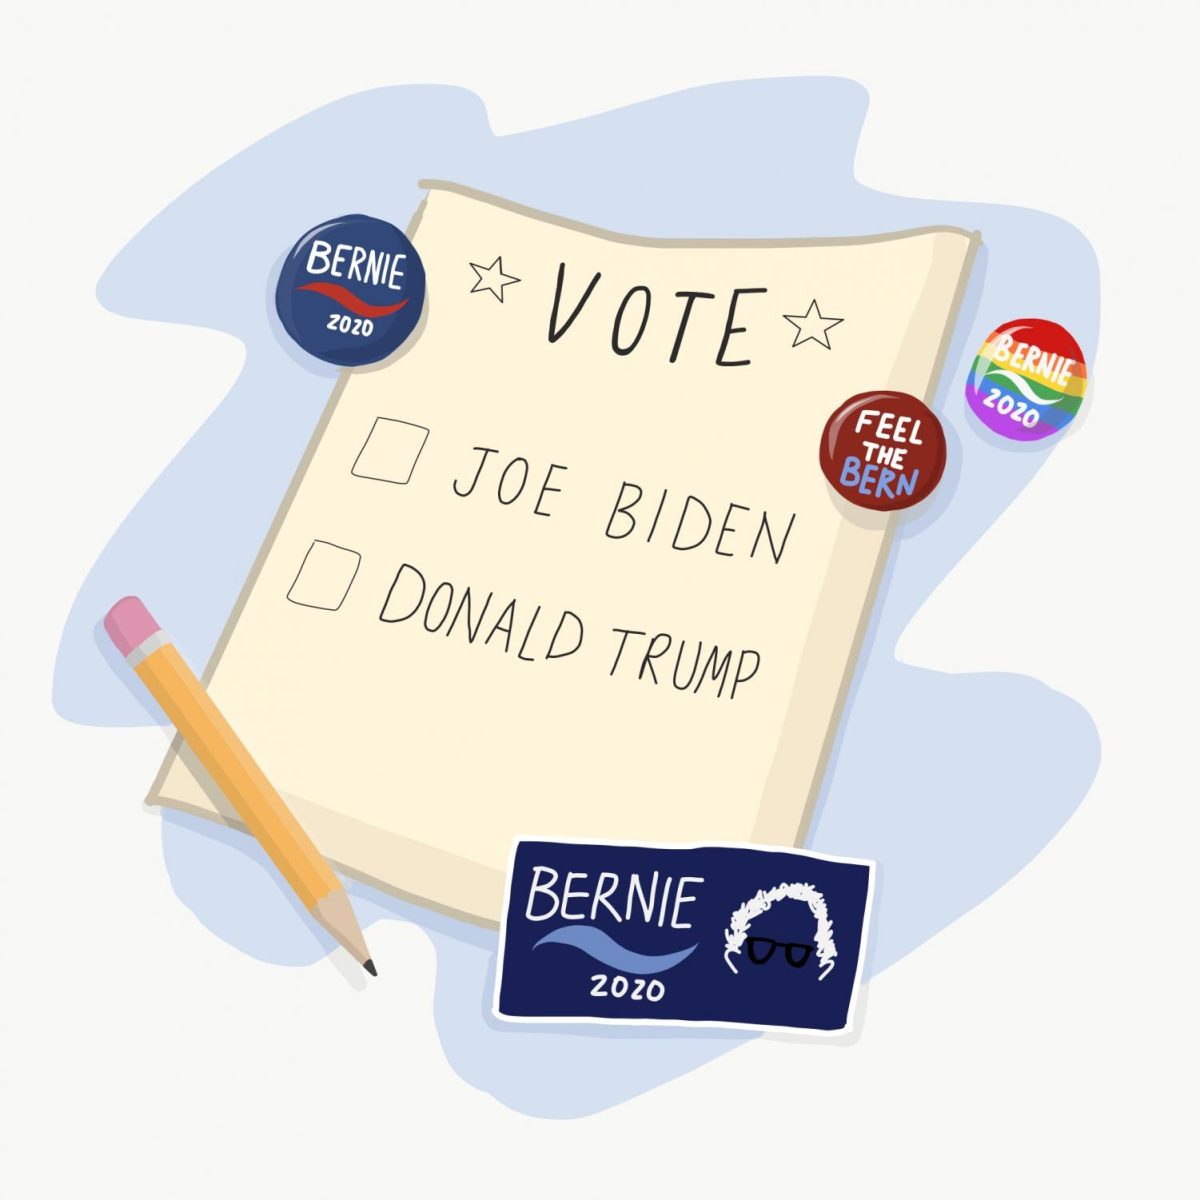 An illustration of a voting ballot with the options “Joe Biden” and “Donald Trump”. The ballot is surrounded by Bernie Sanders campaign buttons and stickers and a pencil.